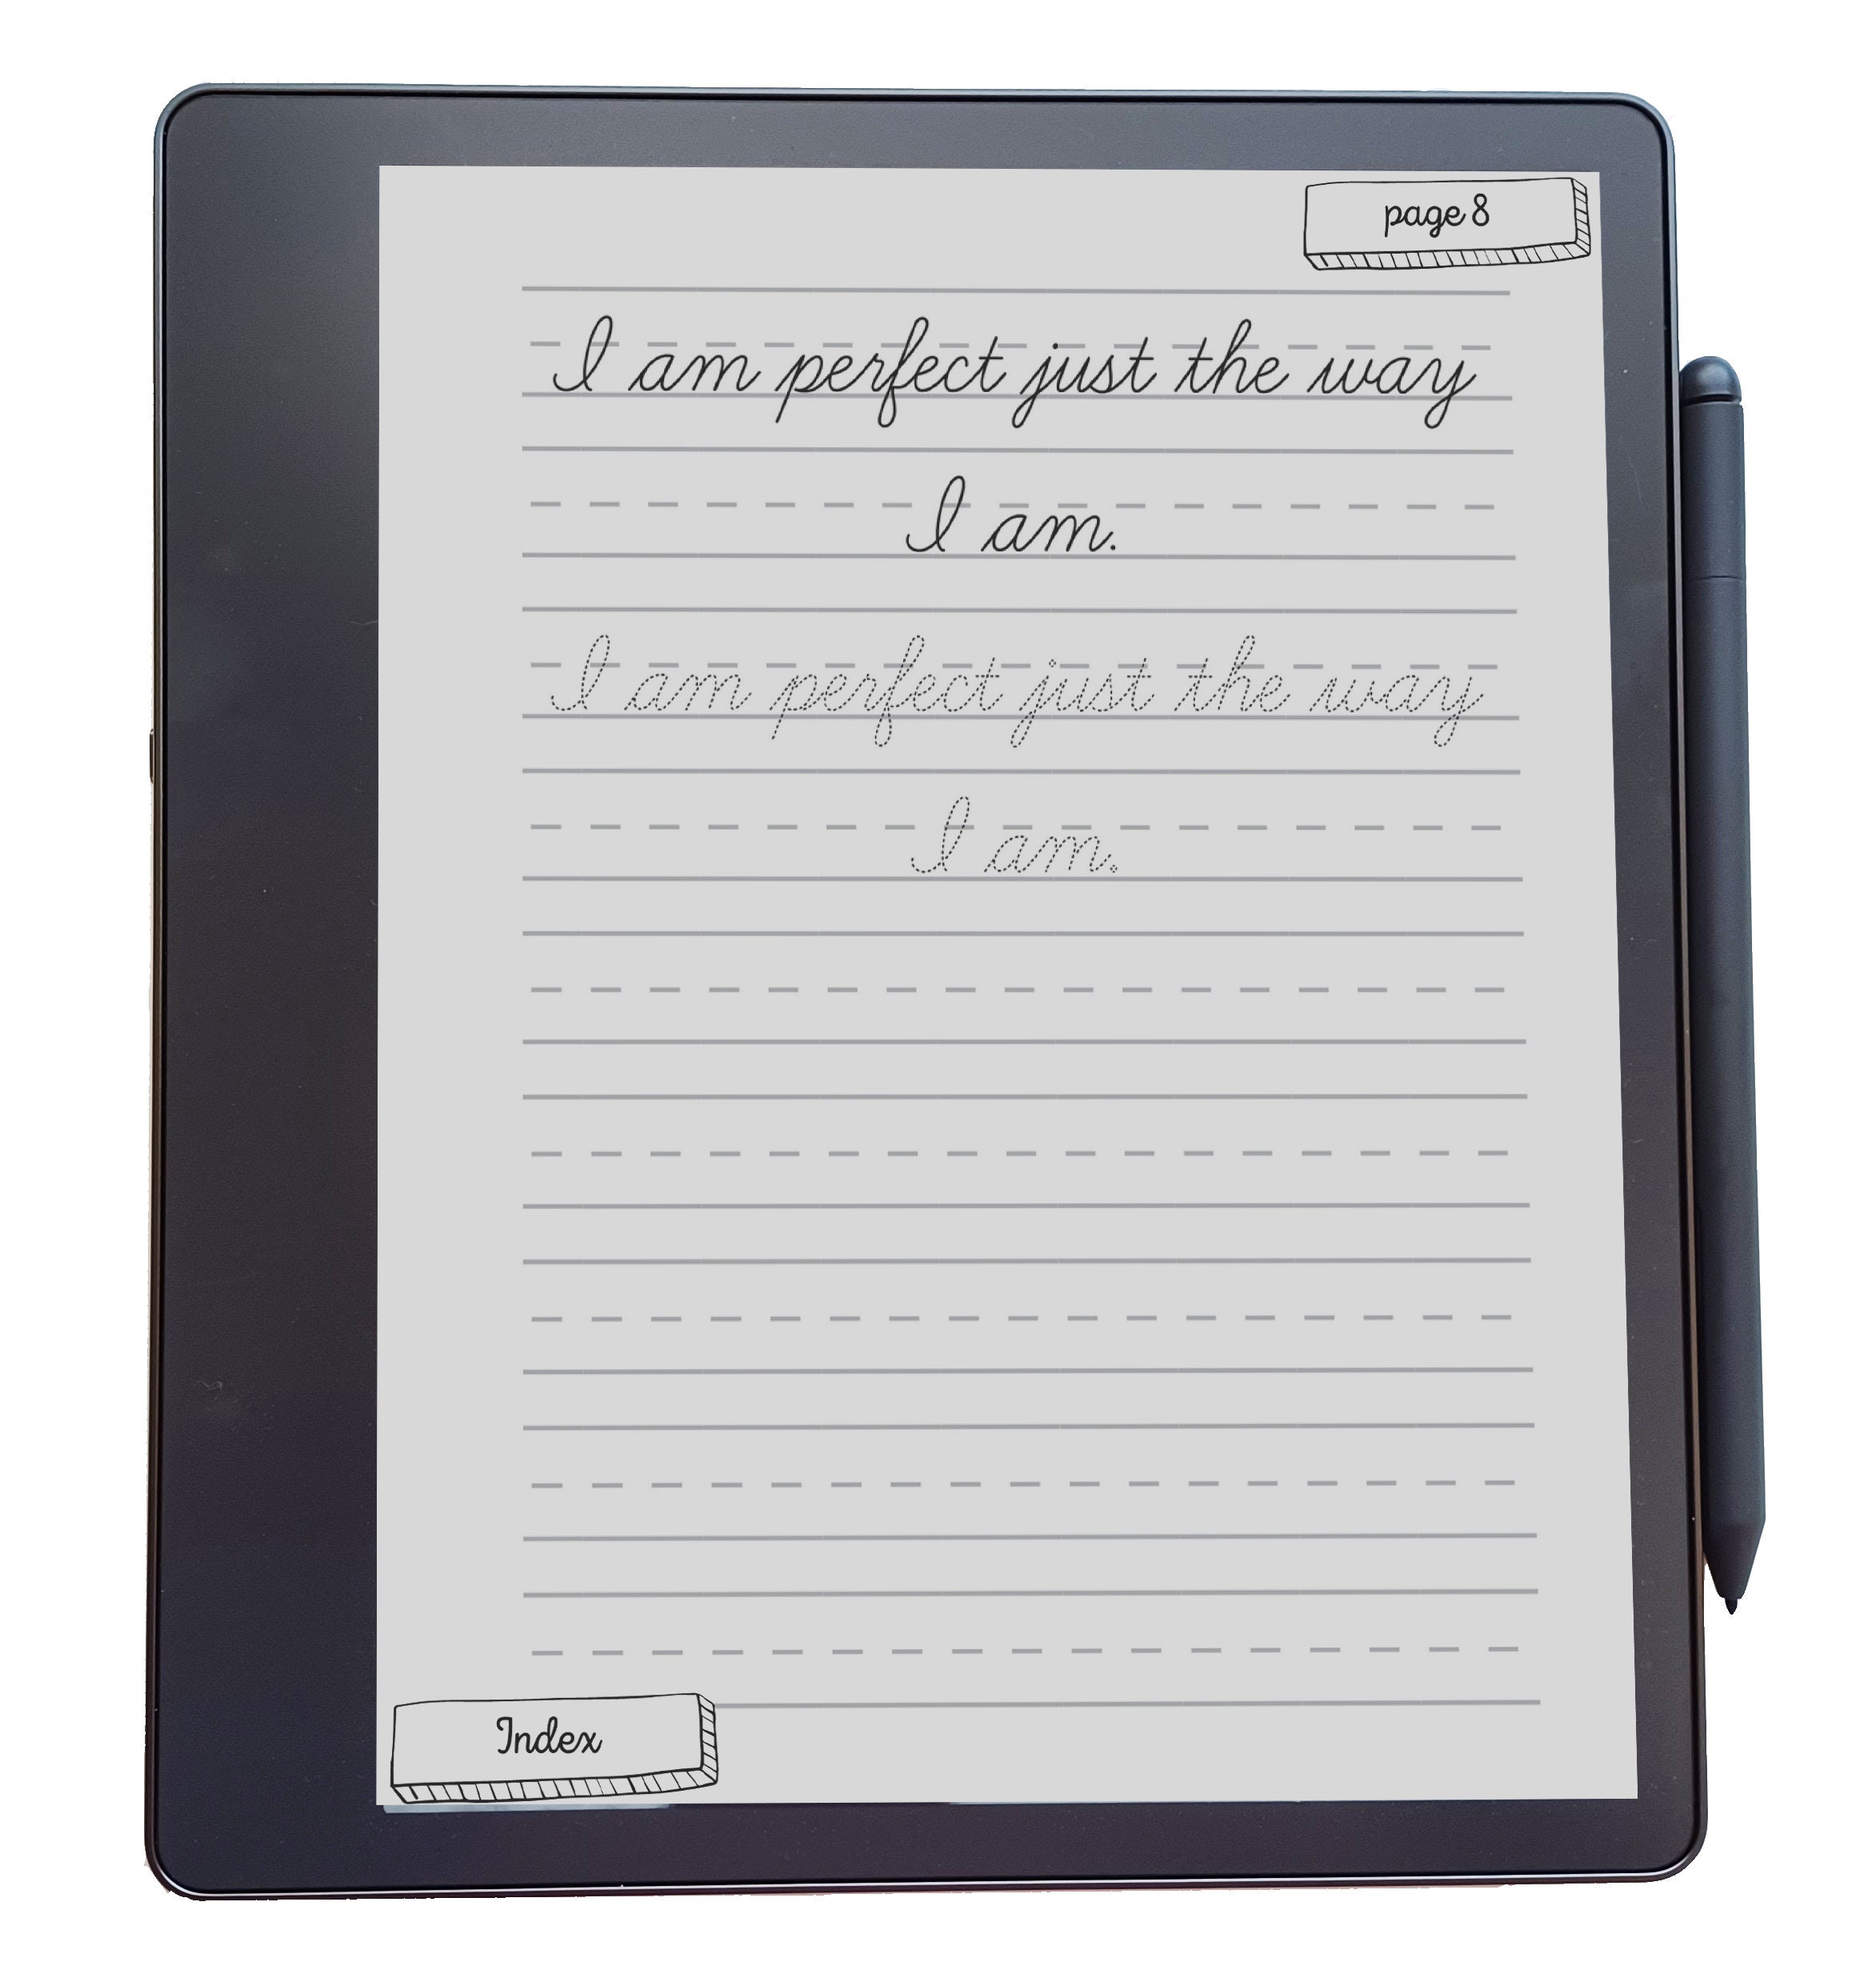 AD + Giveaway  Practising handwriting by writing a book – Bookeez review 